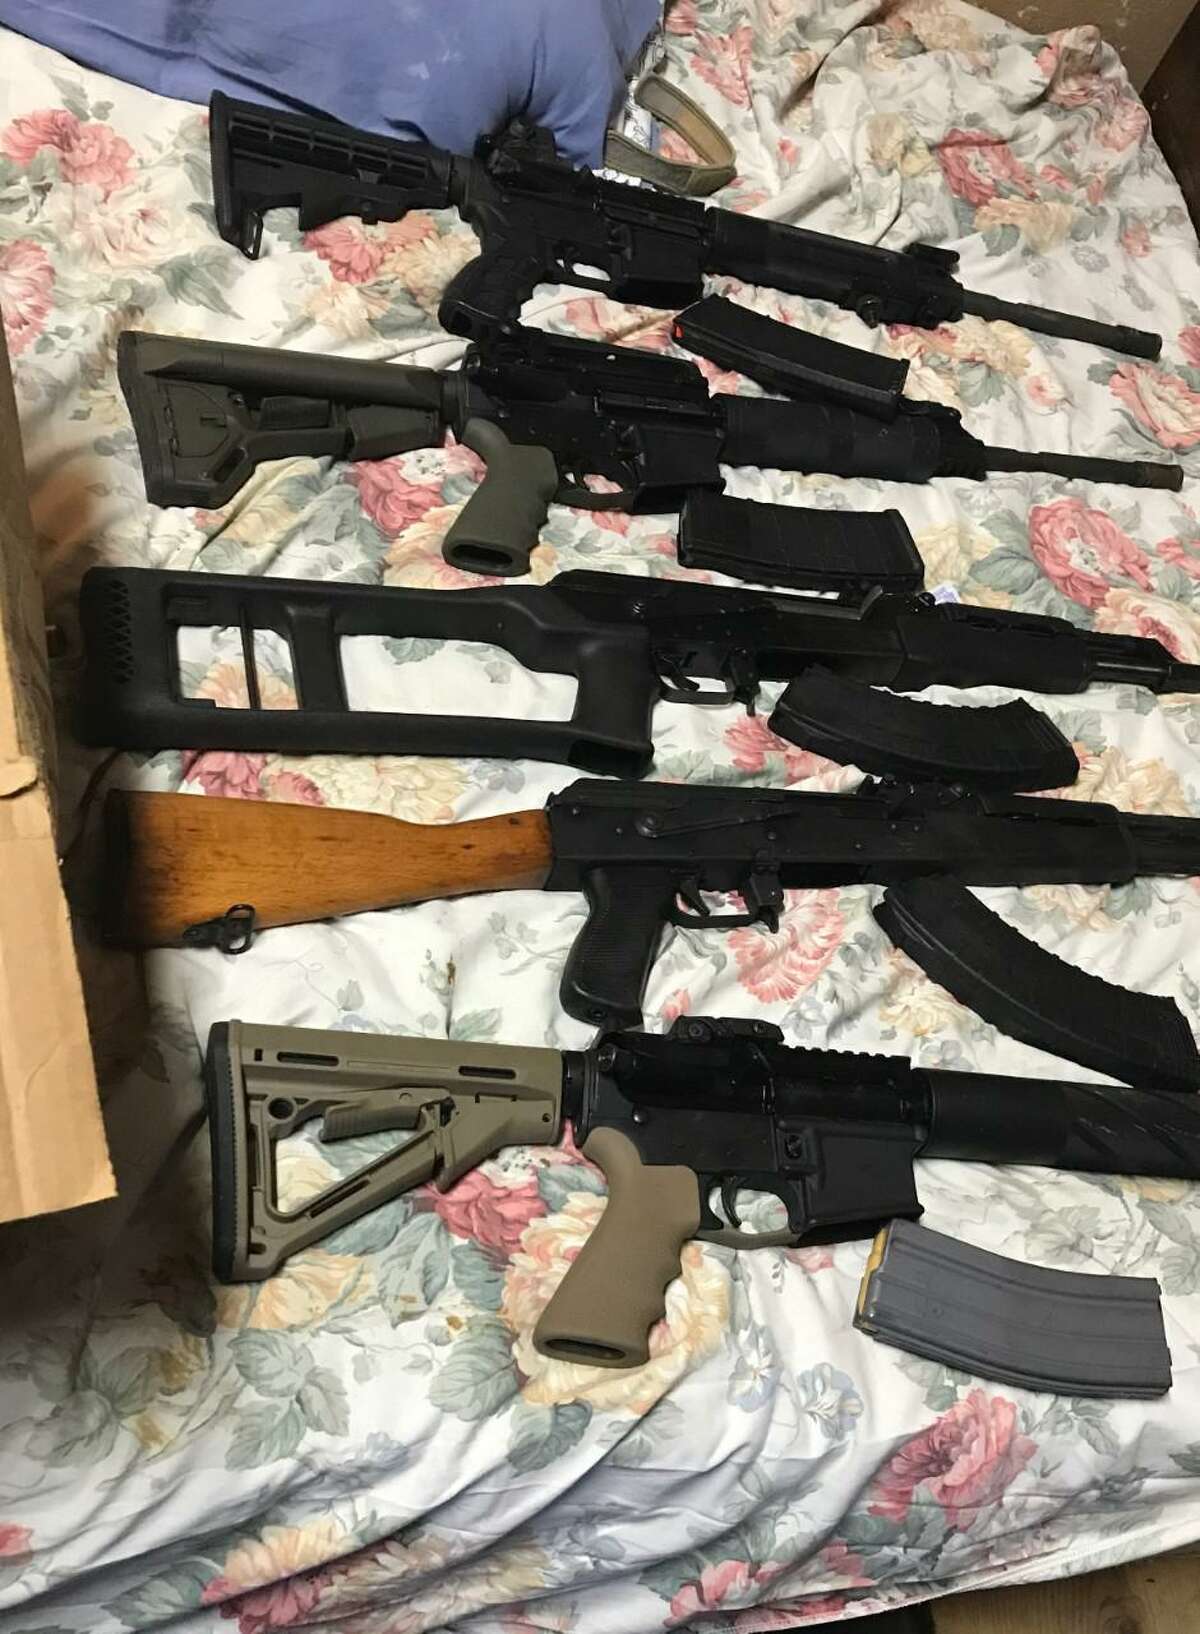 Federal authorities said they seized these firearms during an operation that landed seven people behind bars.